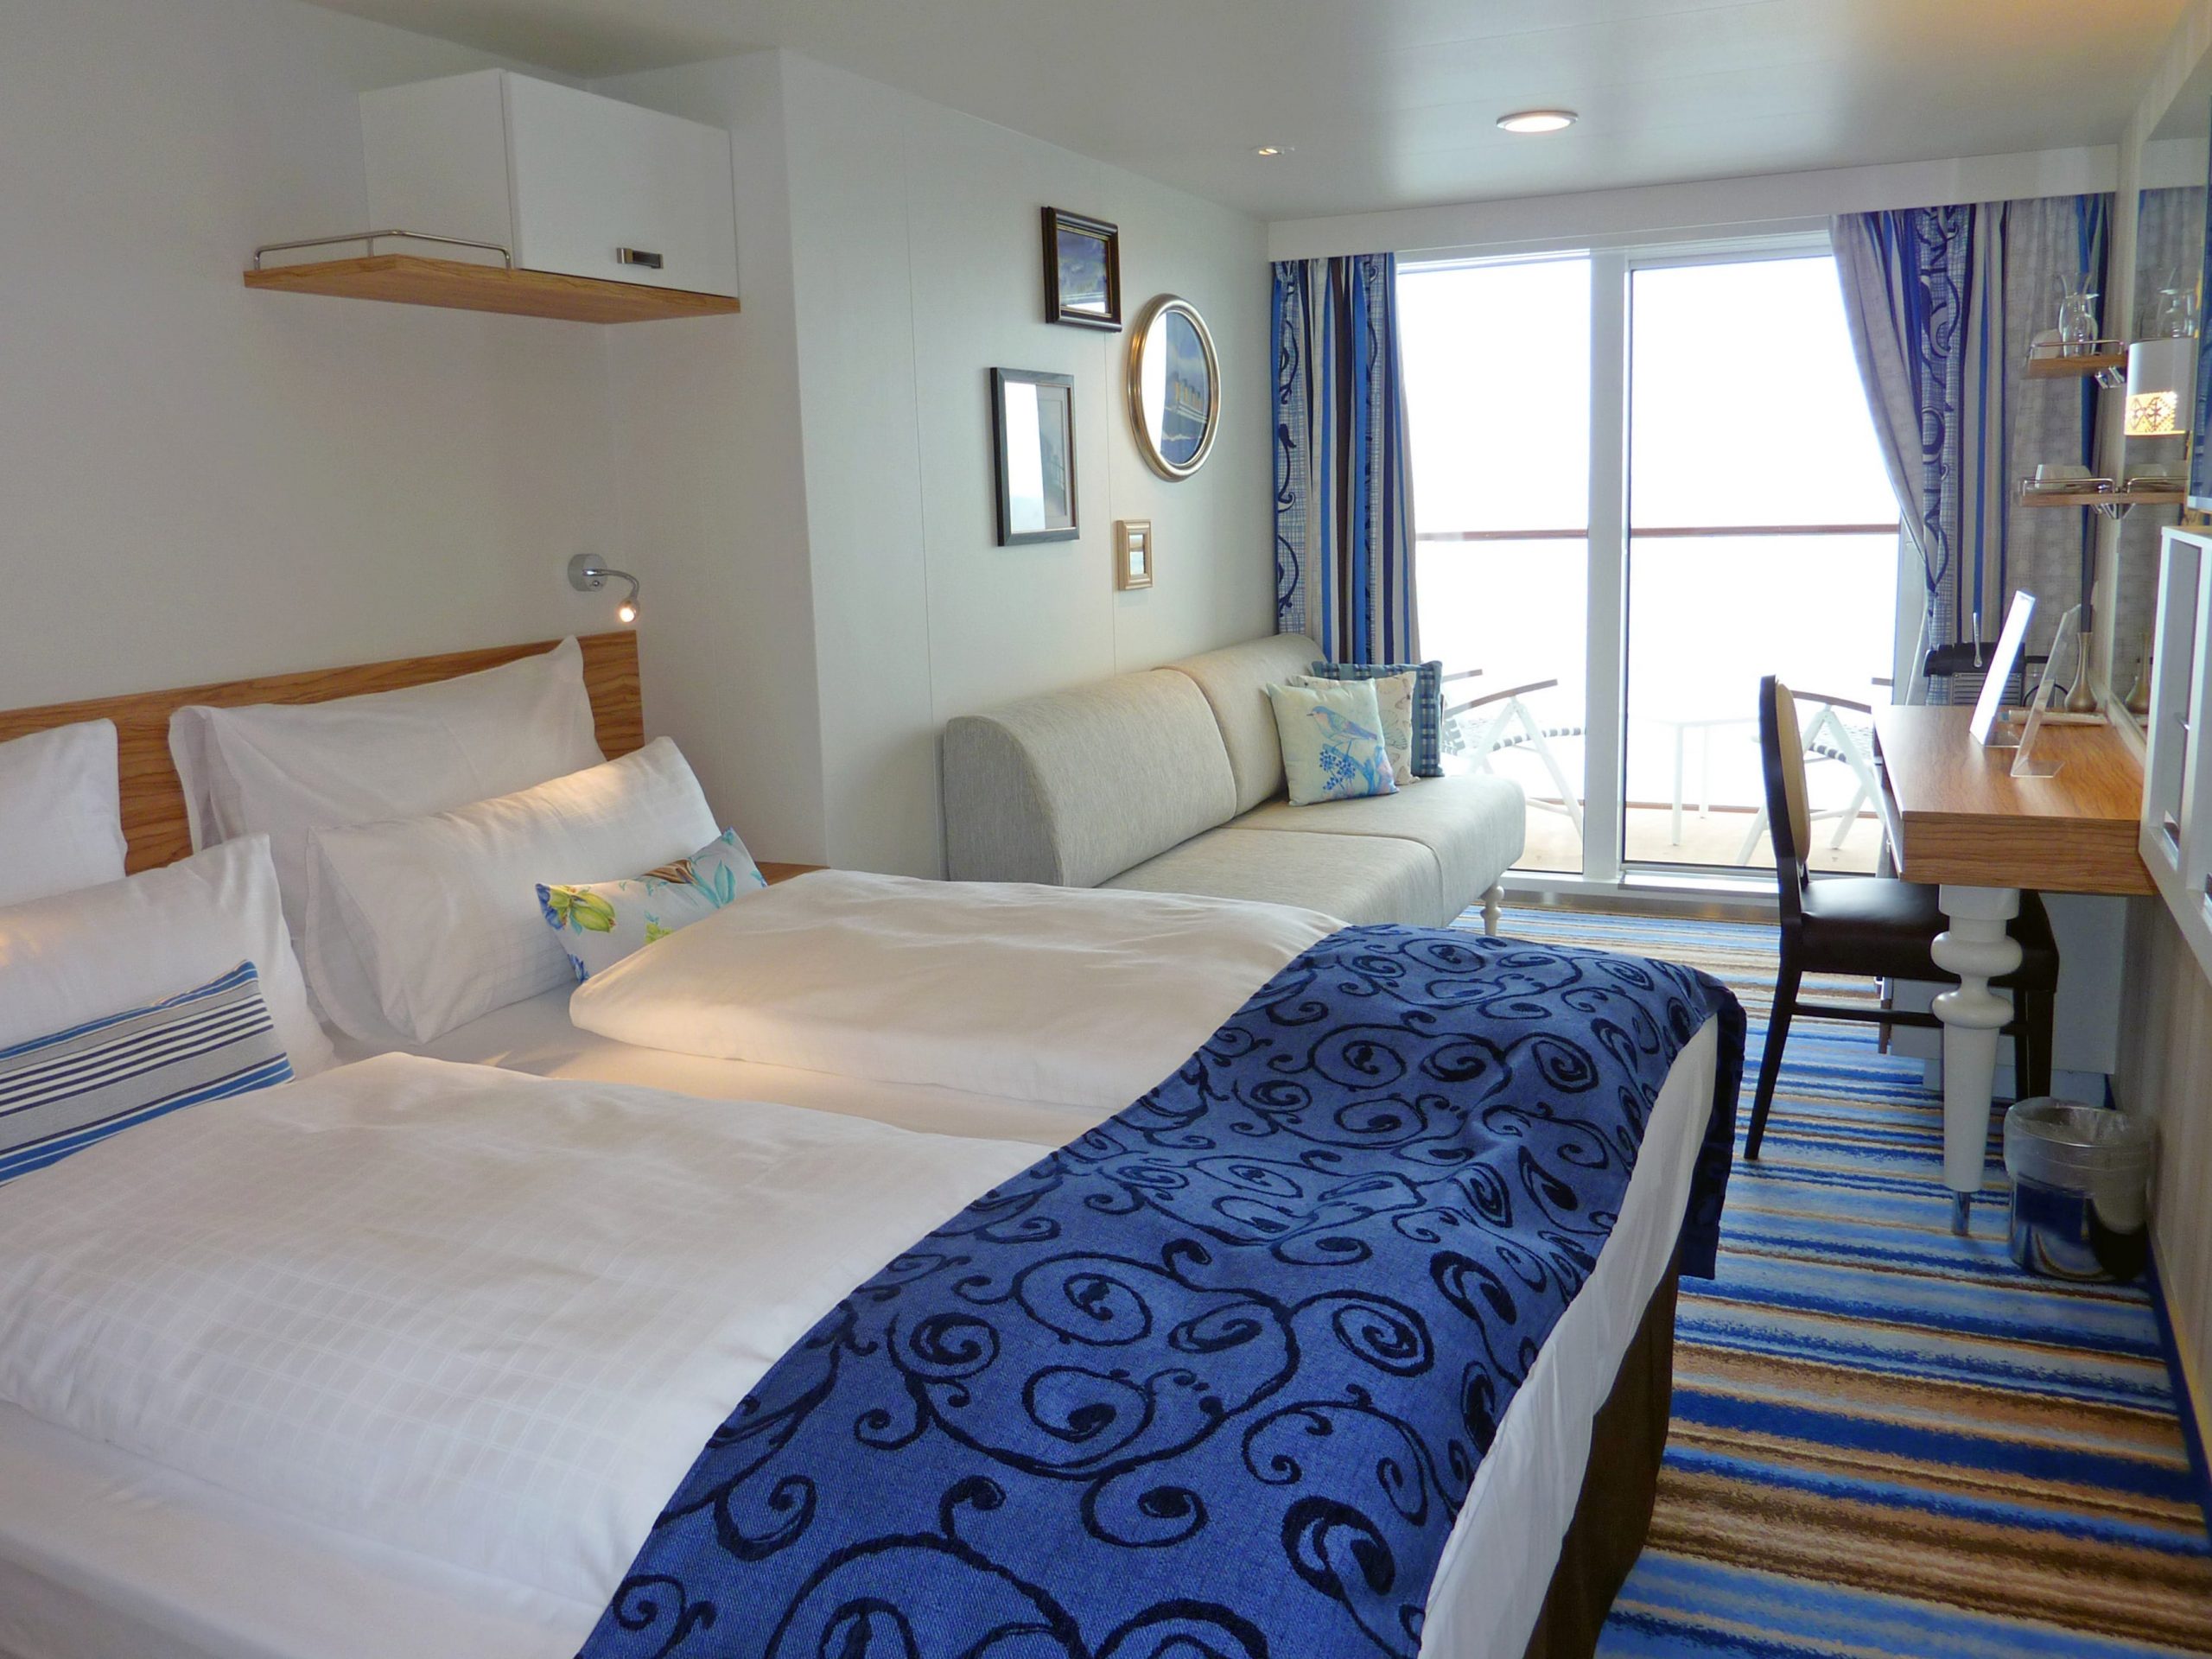 A room on a cruise ship with two beds with white sheets, a white sofa, mainly blue striped carpet, and vanity